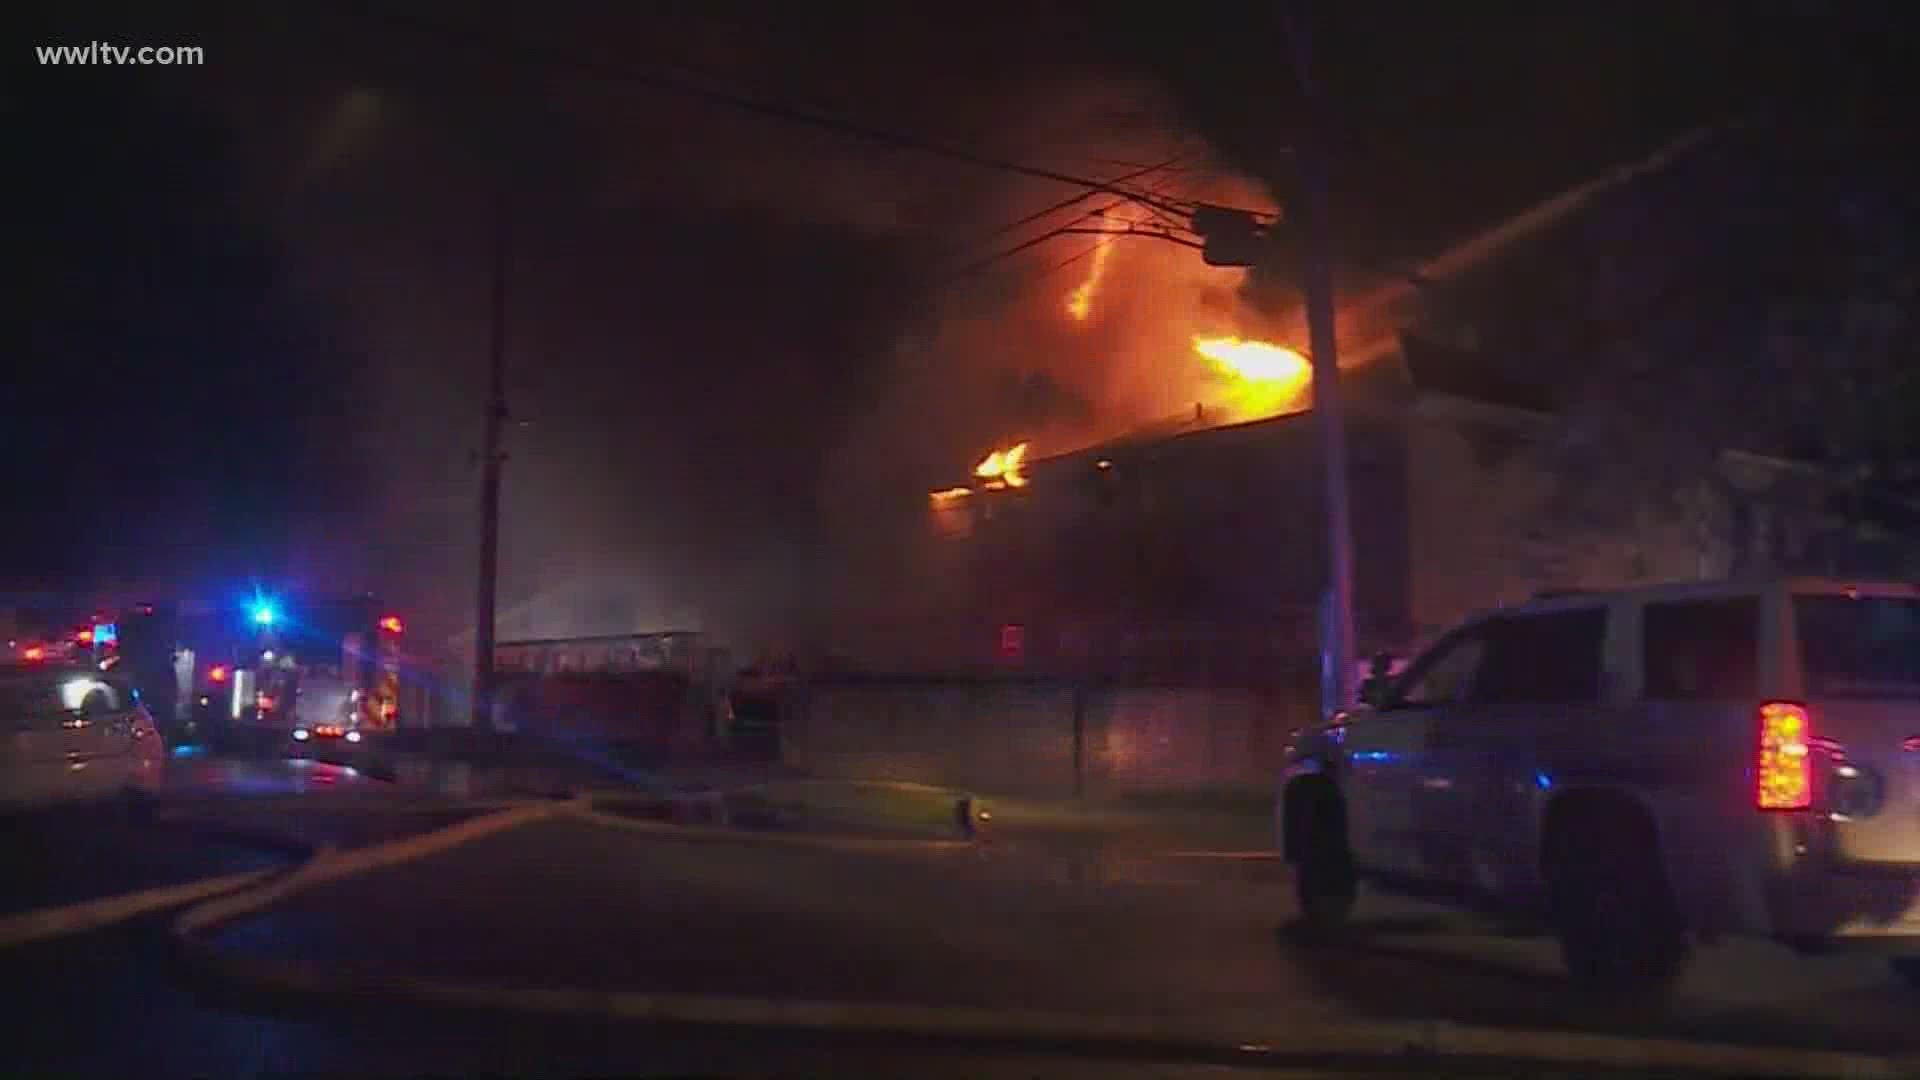 3-alarm fire destroys apartment complex in Central City, 20 occupied apartments burn